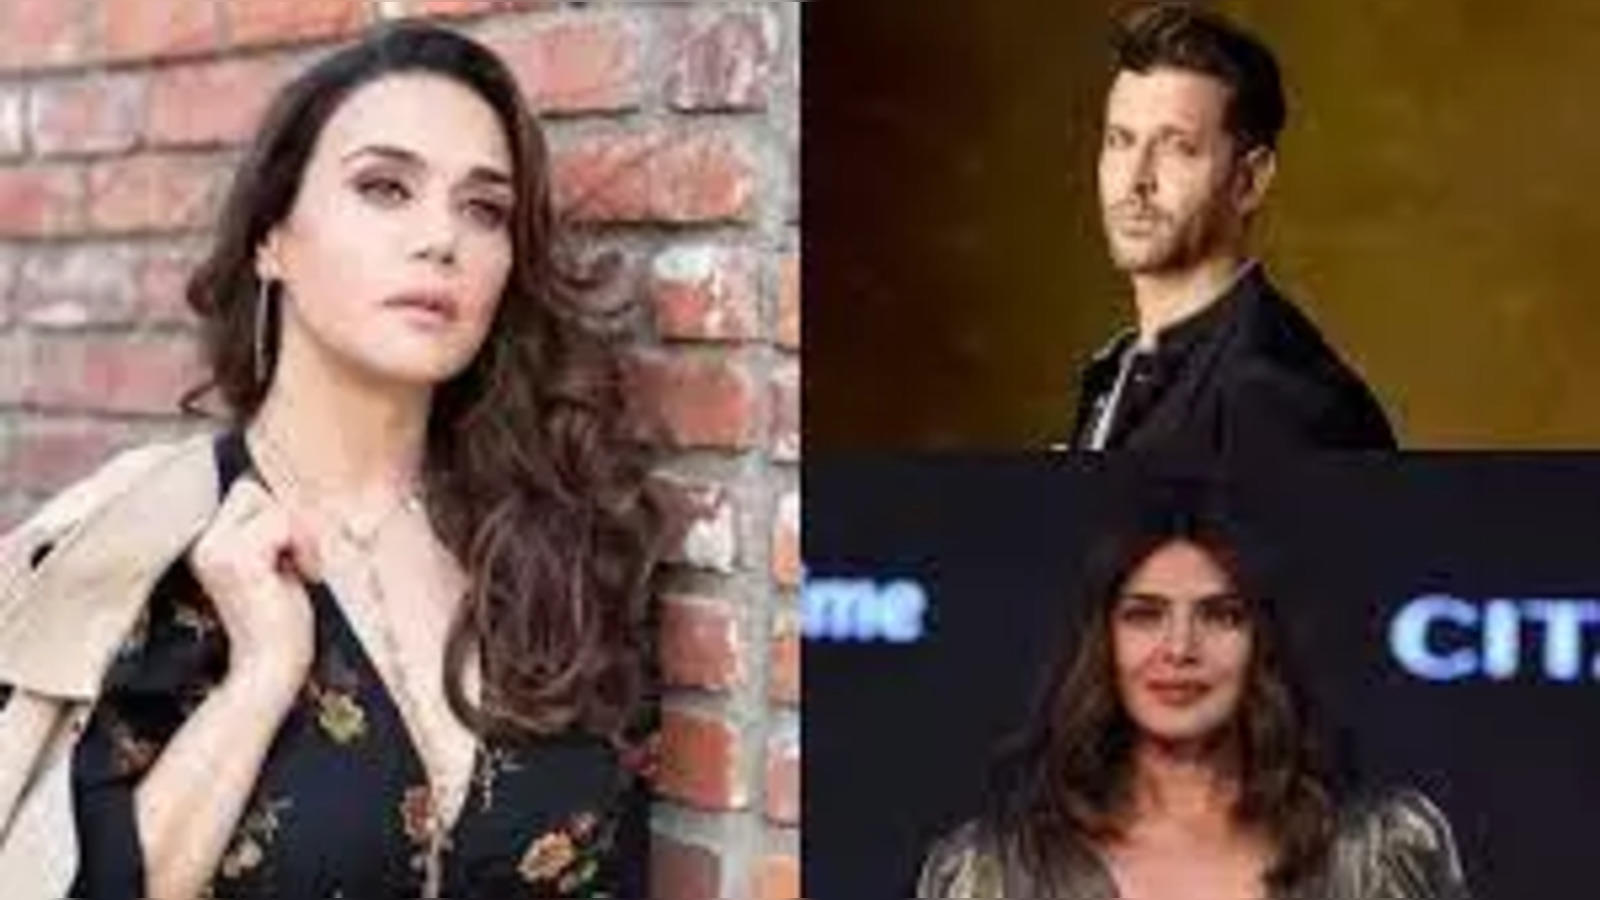 Preity Zinta Sex Video Full Hd Download - Preity Zinta Harassment News: Preity Zinta opens up about incidents of  harassment, garners support from Hrithik Roshan, Priyanka Chopra and others  - The Economic Times